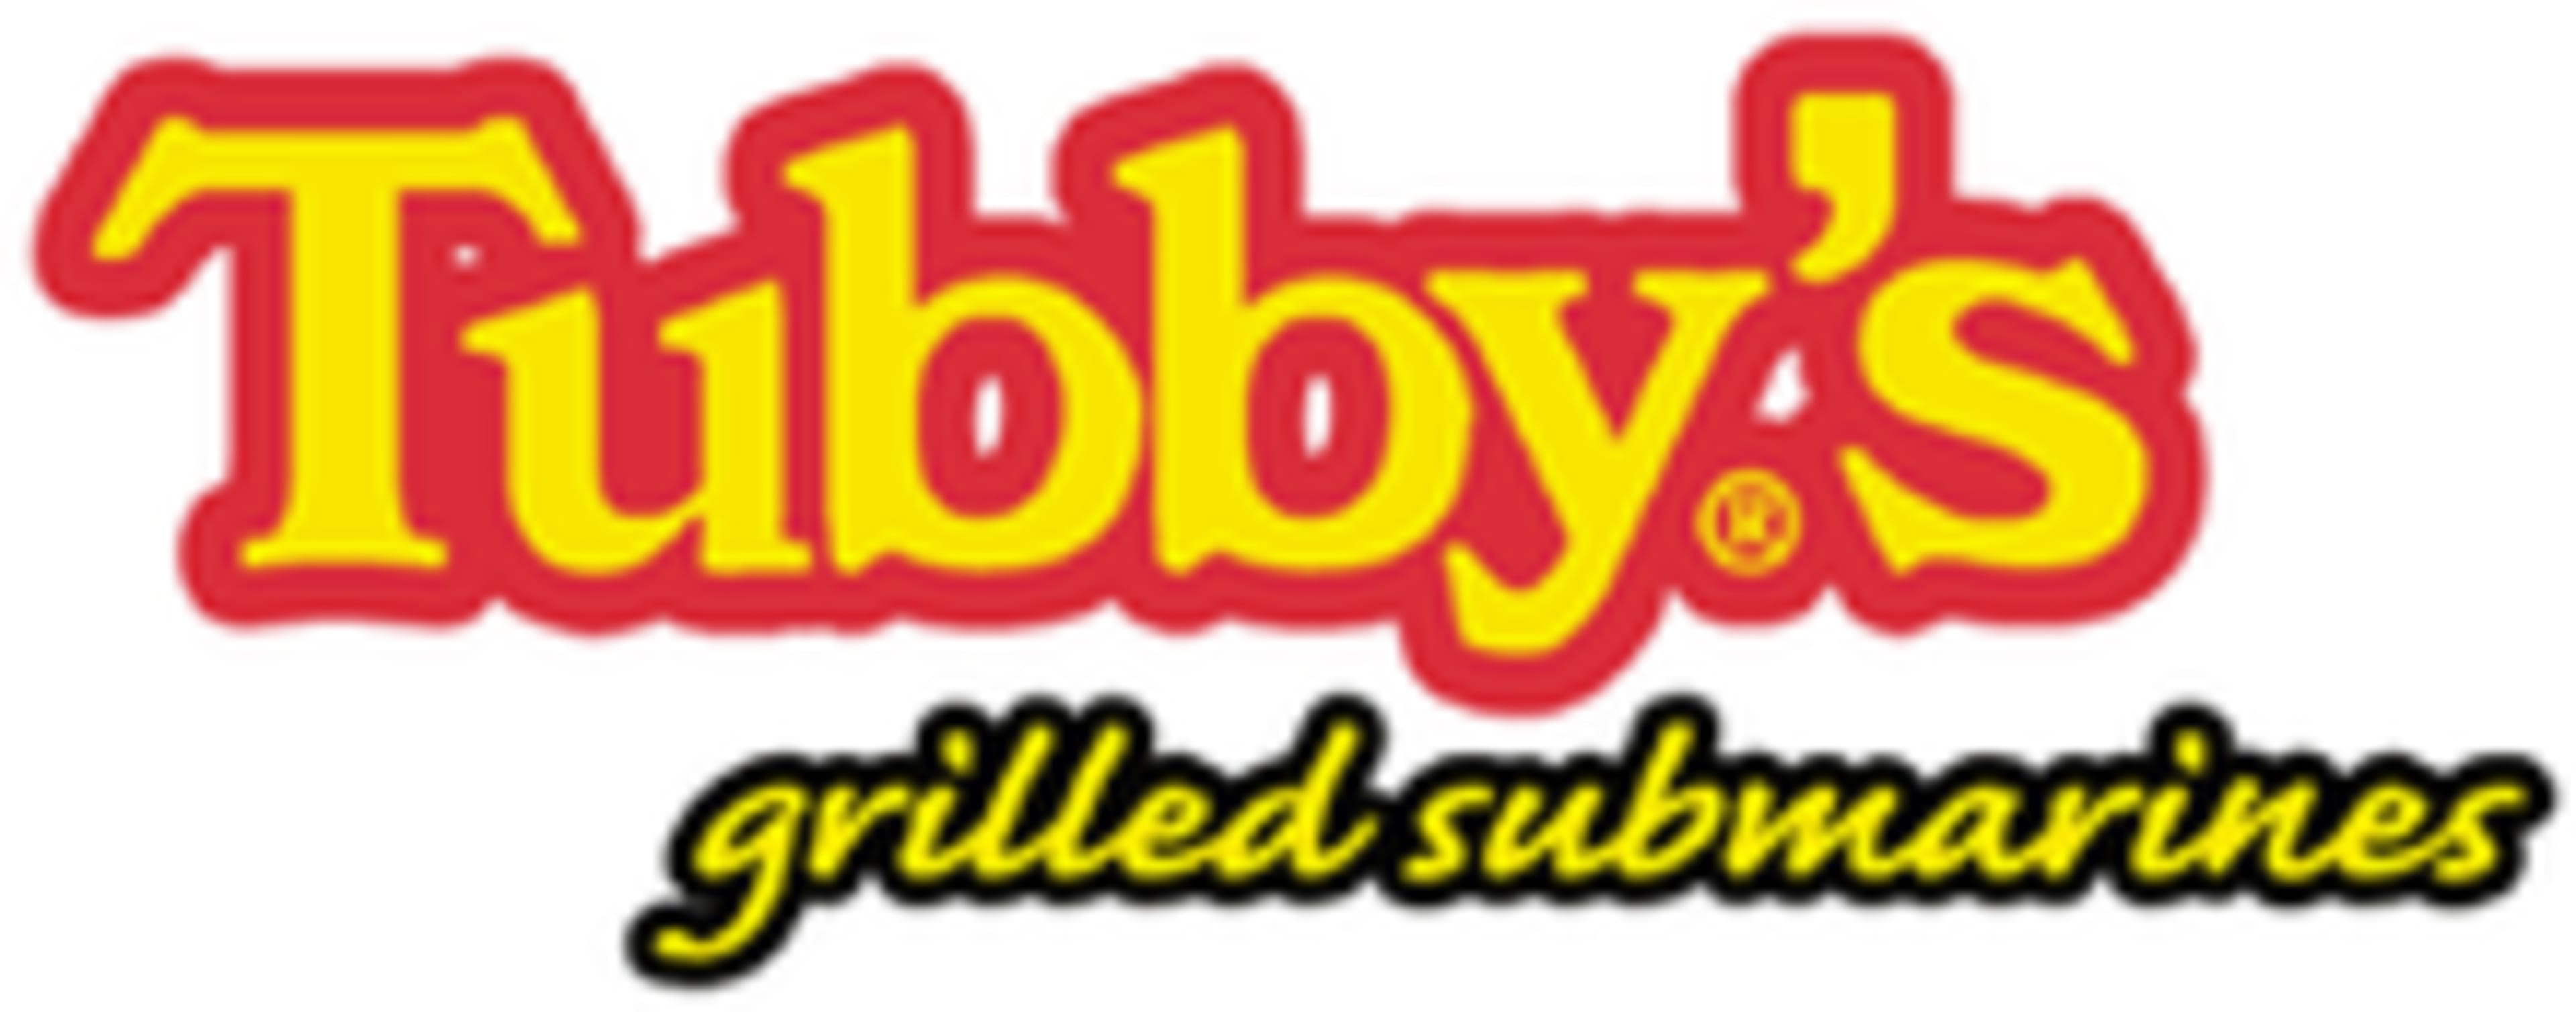 Tubby's Grilled SubmarinesCode